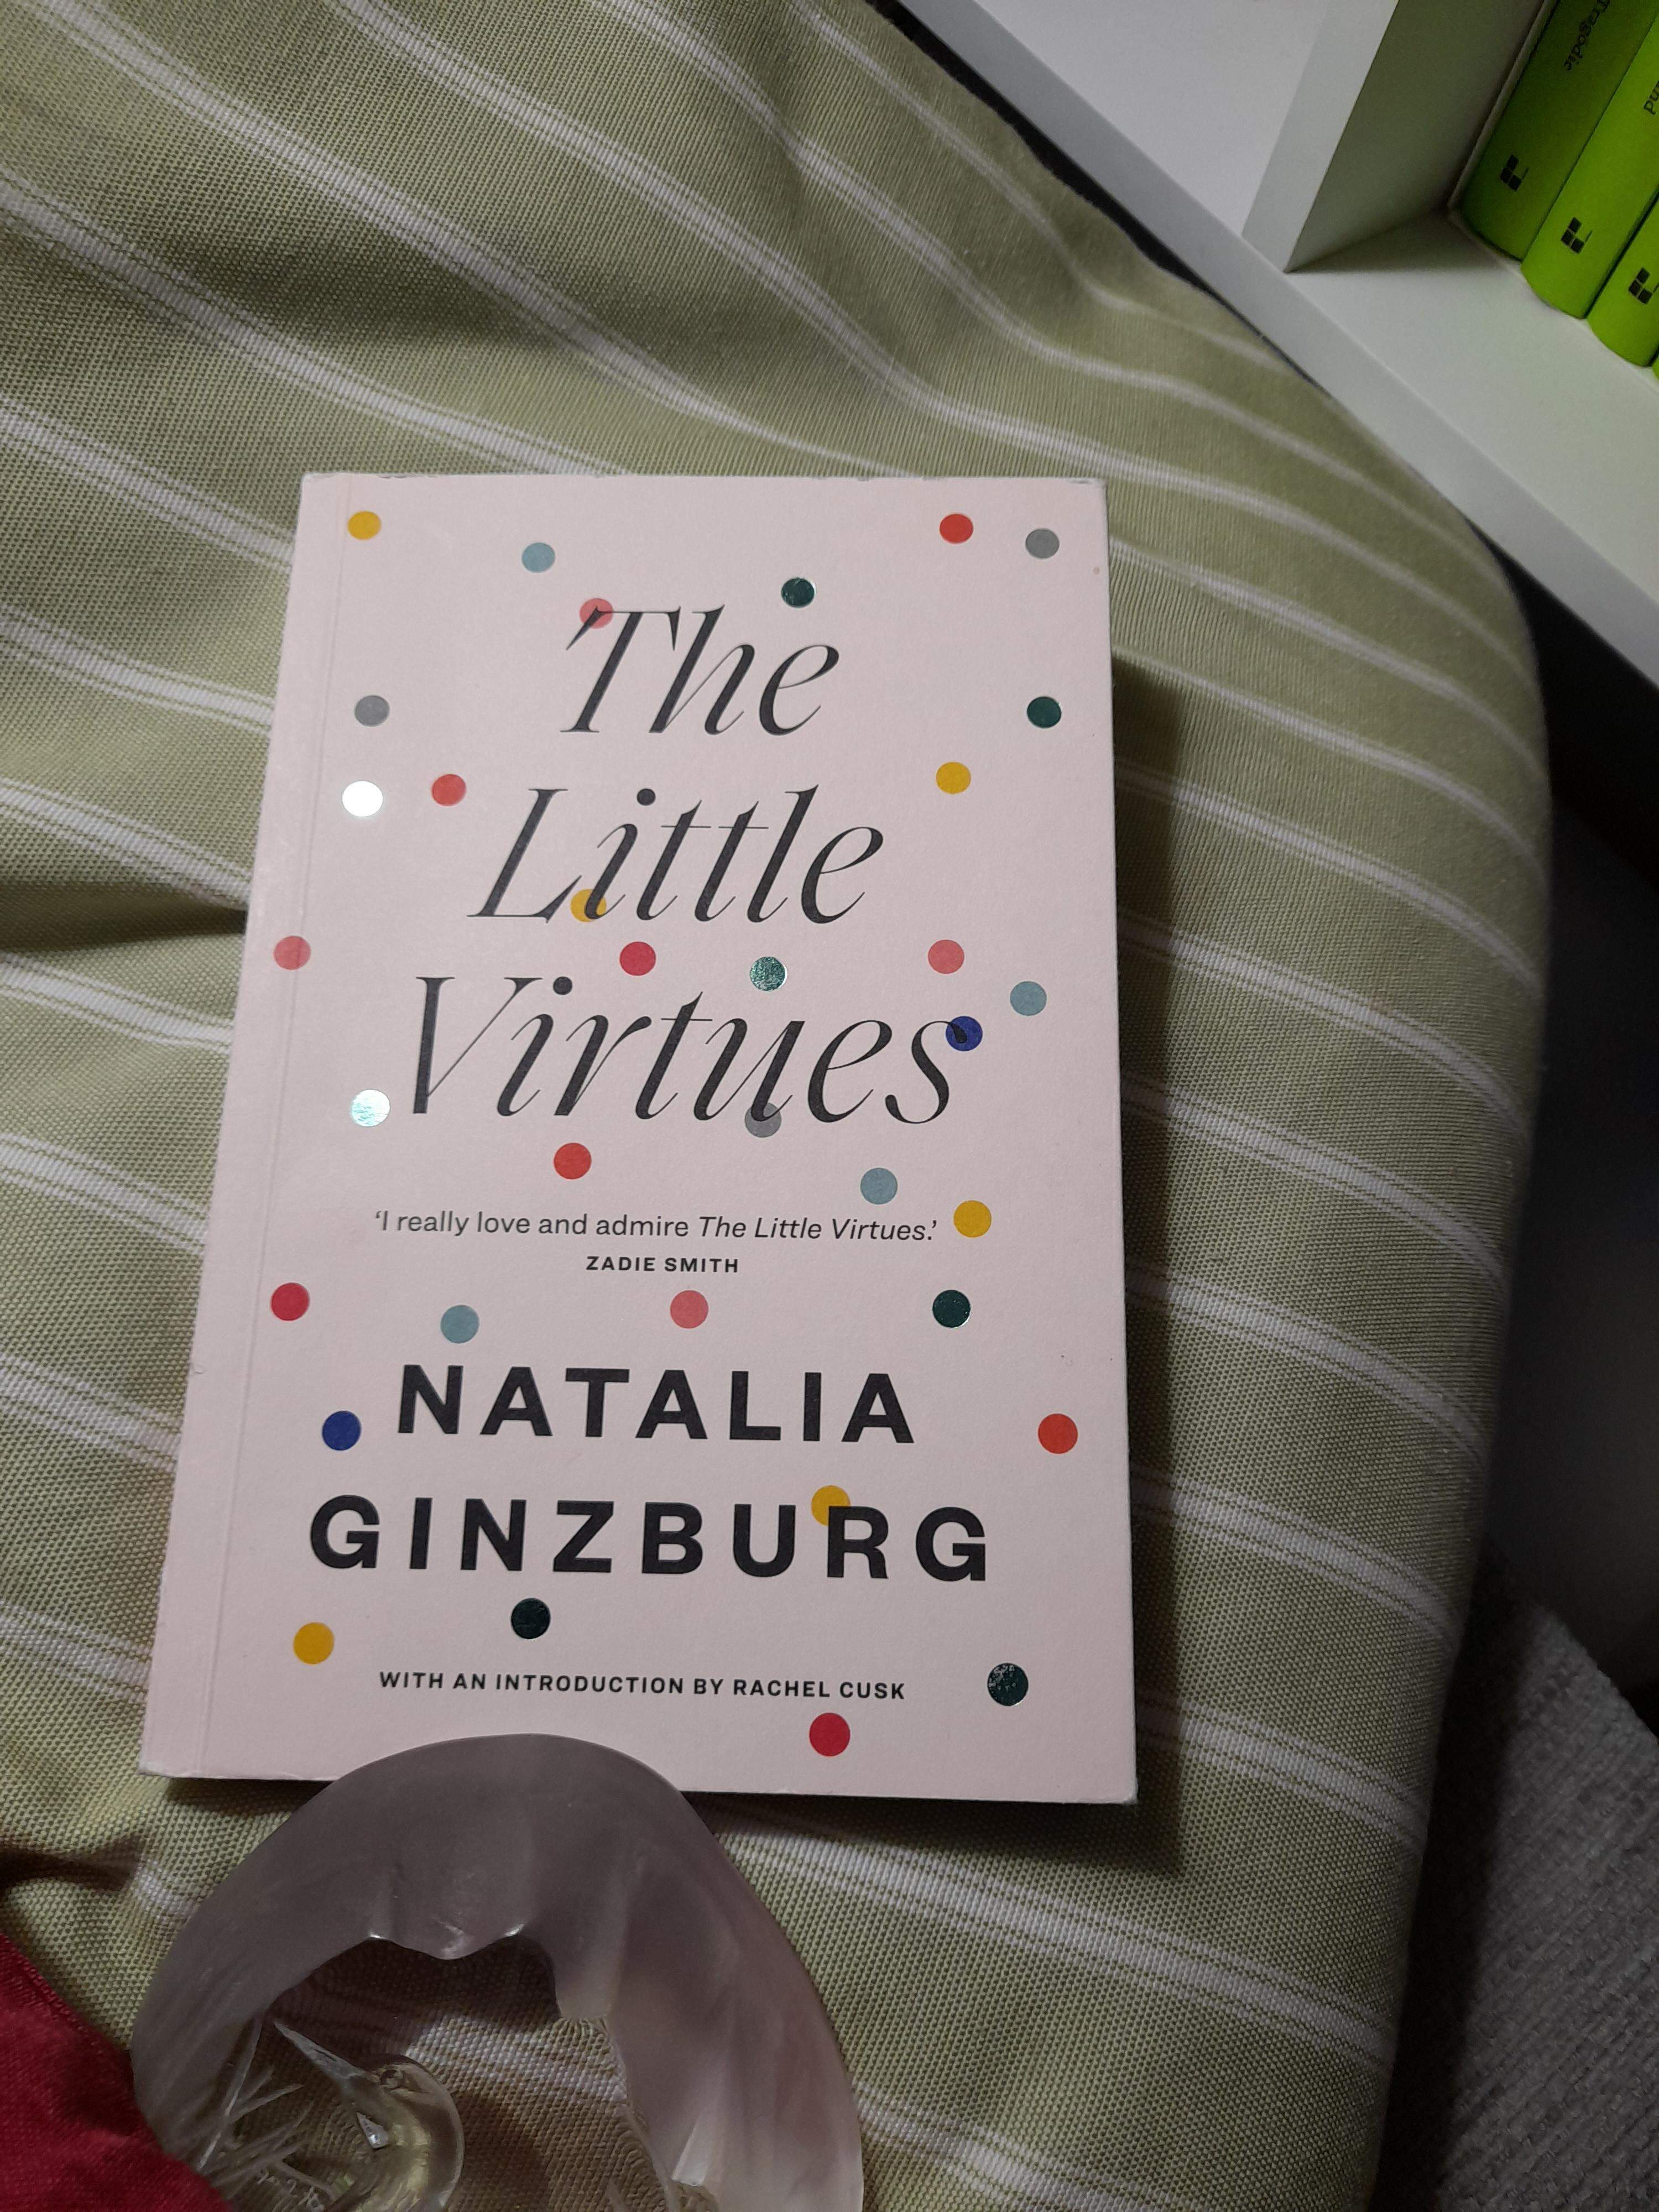 The Little Virtues by Natalia Ginzburg